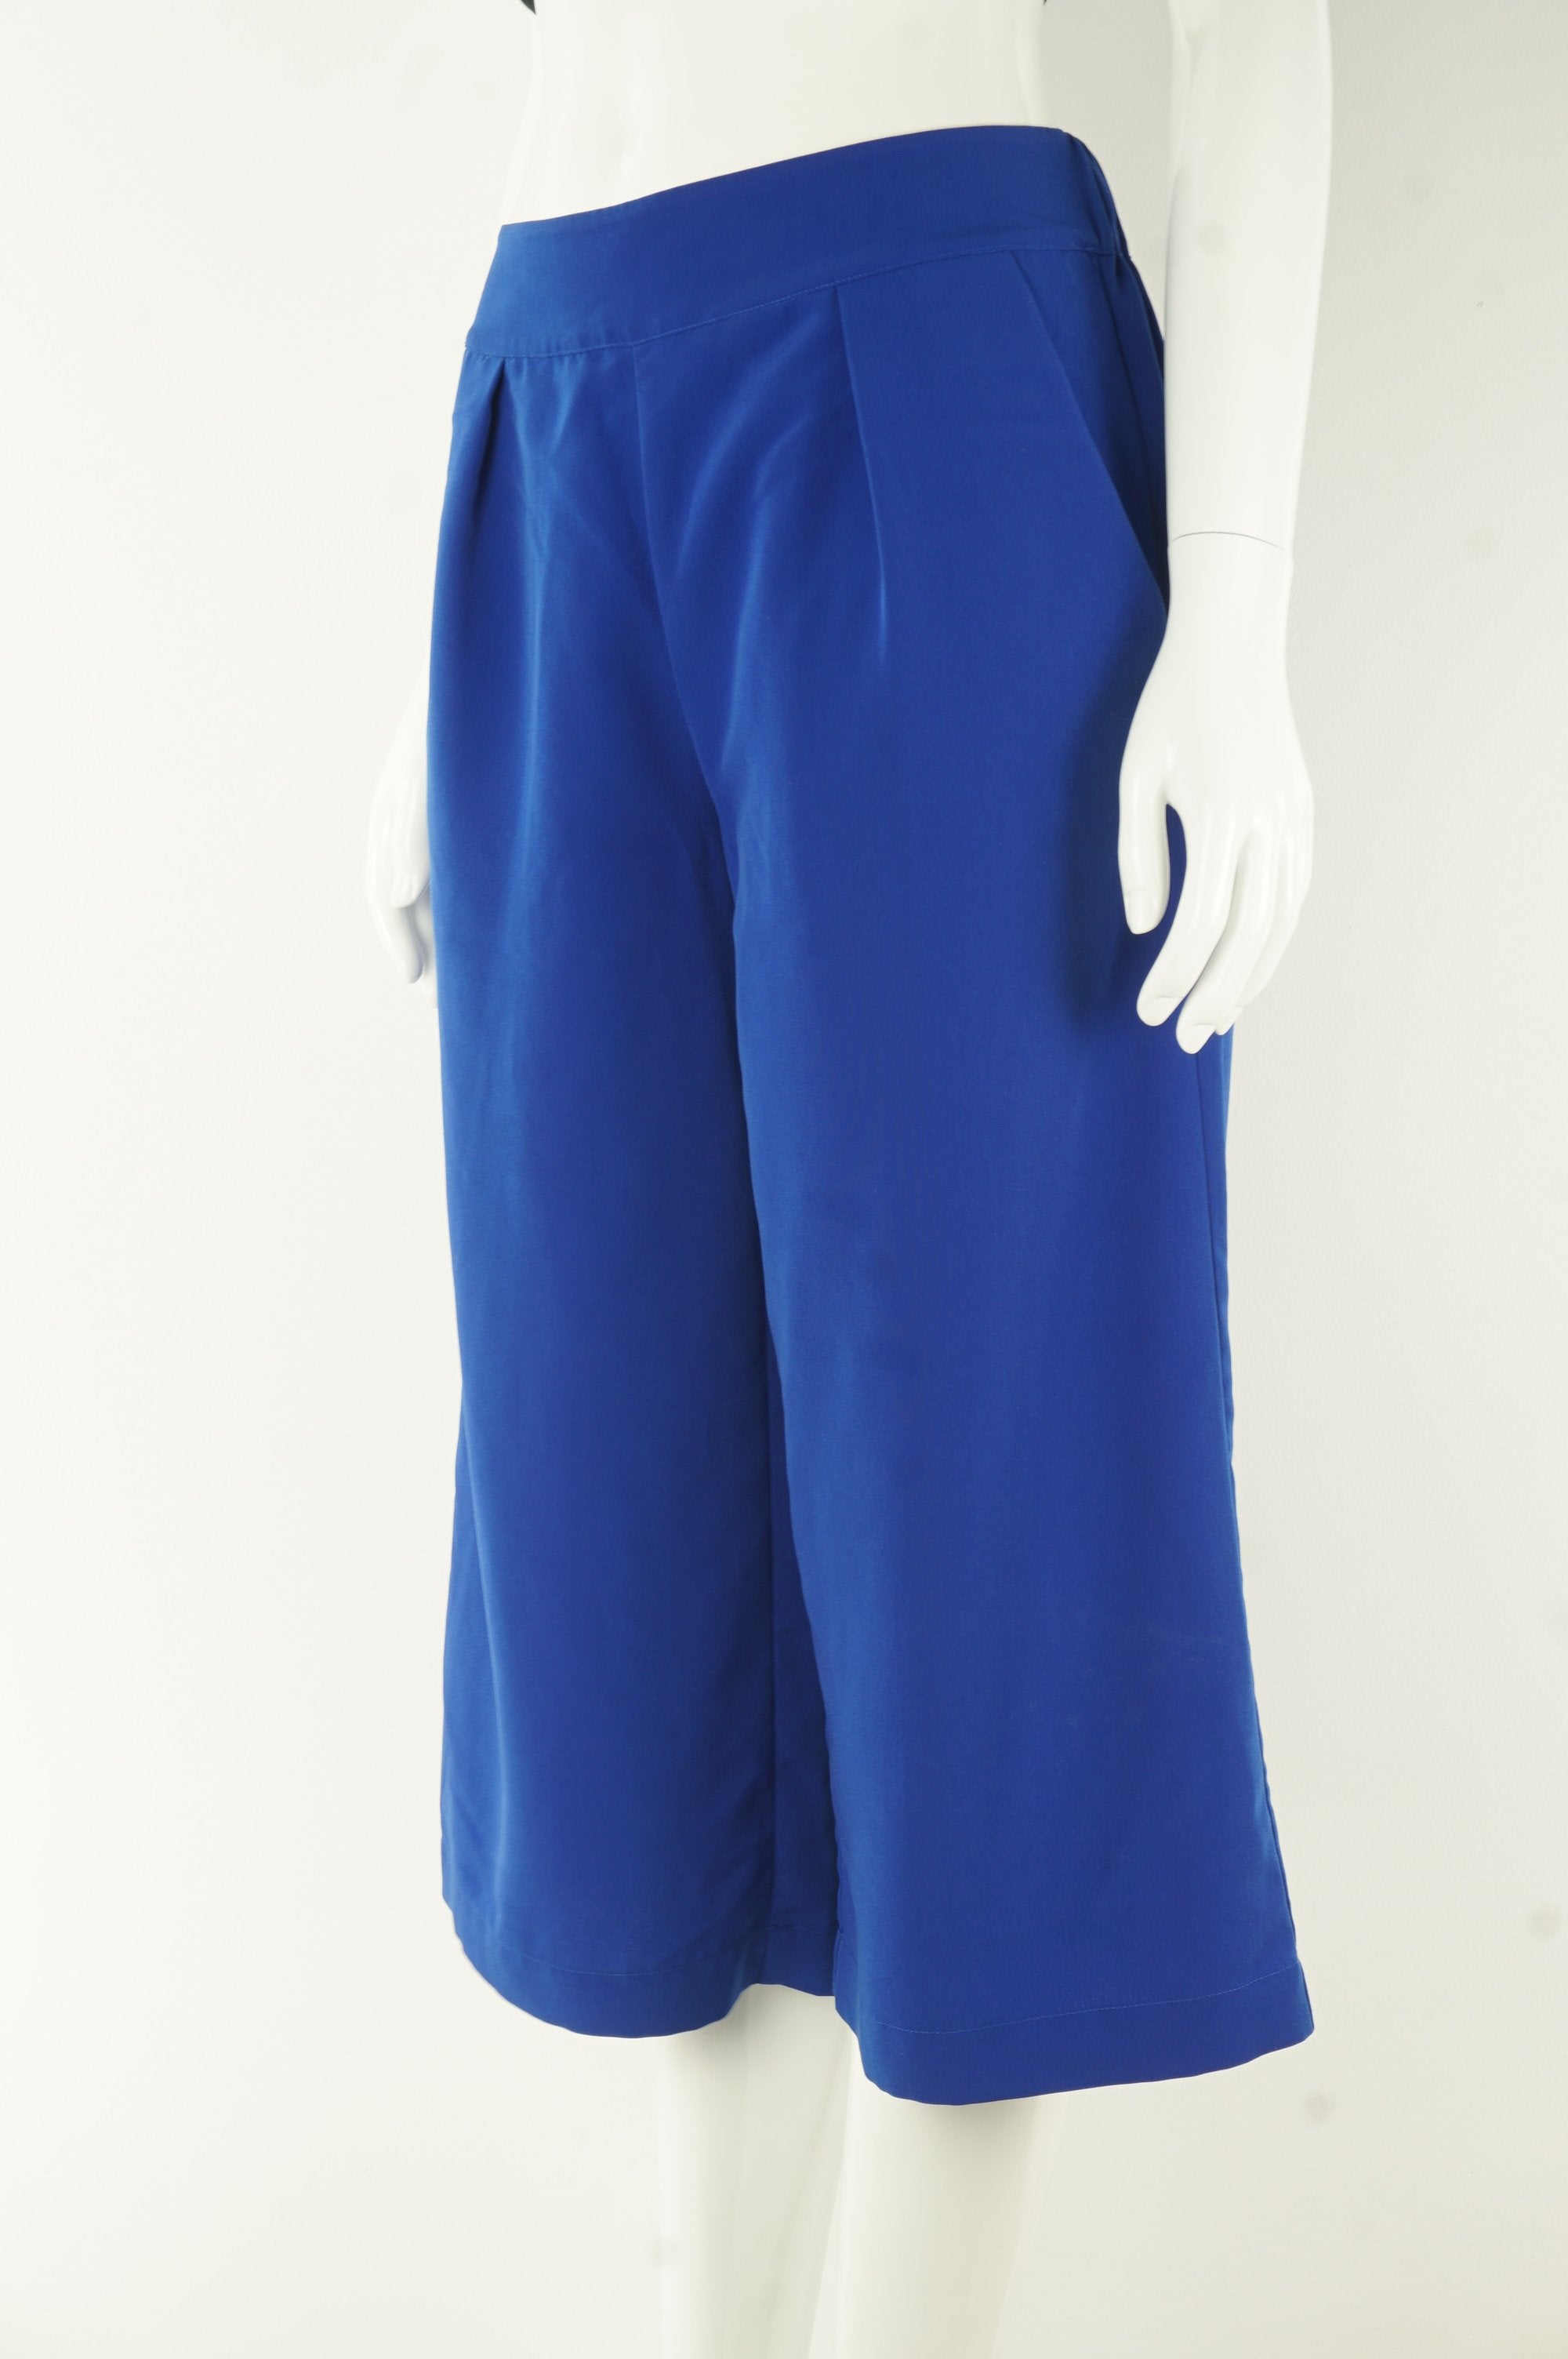 H Halston Cropped Wide Legged Pants, Casual or formal, you call. Comfort is guaranteed!, Blue, 100% polyester, women's Pants, women's Blue Pants, H Halston women's Pants, women's cropped wide-legged capri pants, women's comfortable loose capri pants